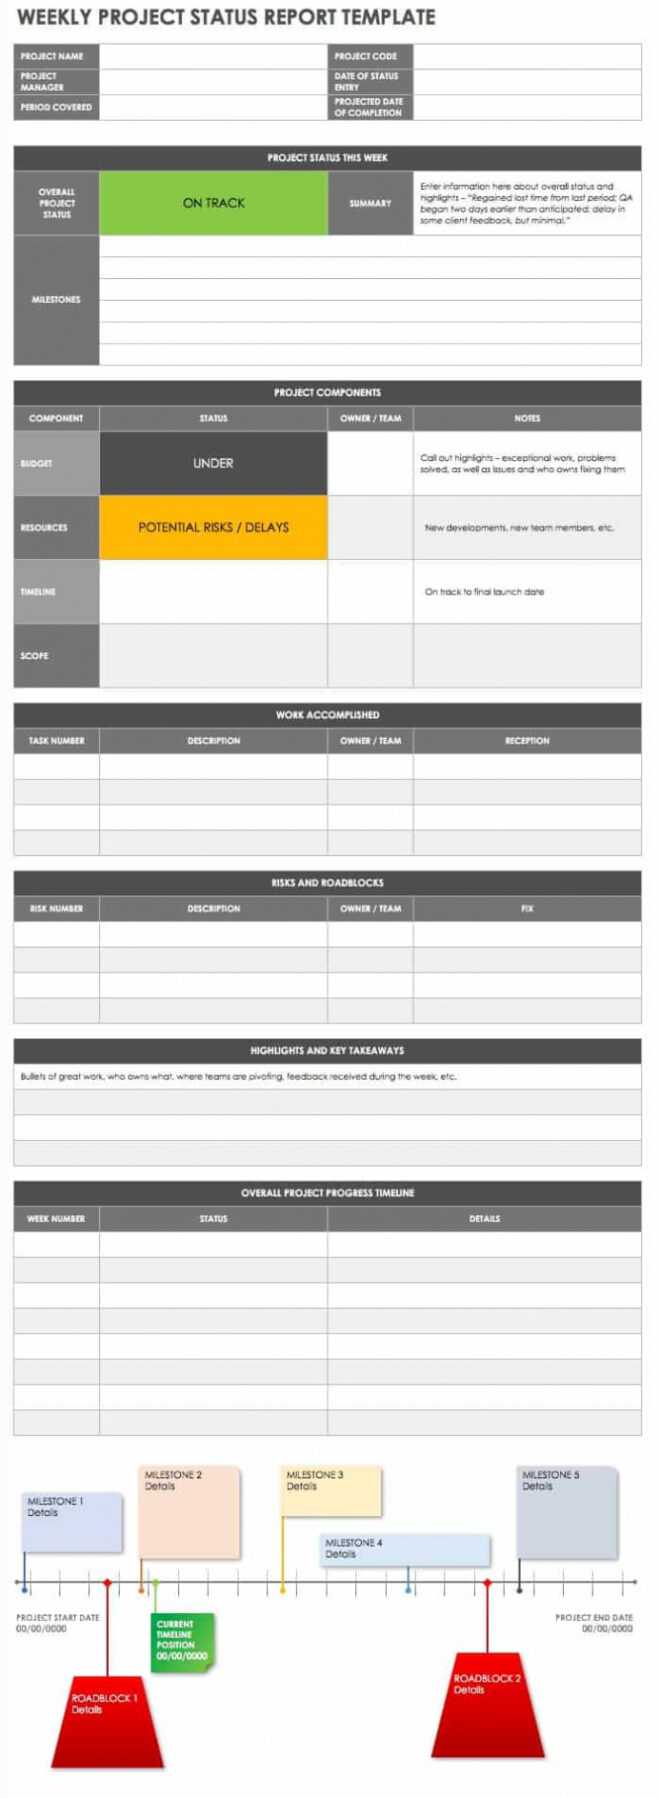 Free Project Status Templates | Smartsheet throughout Project Weekly Status Report Template Excel